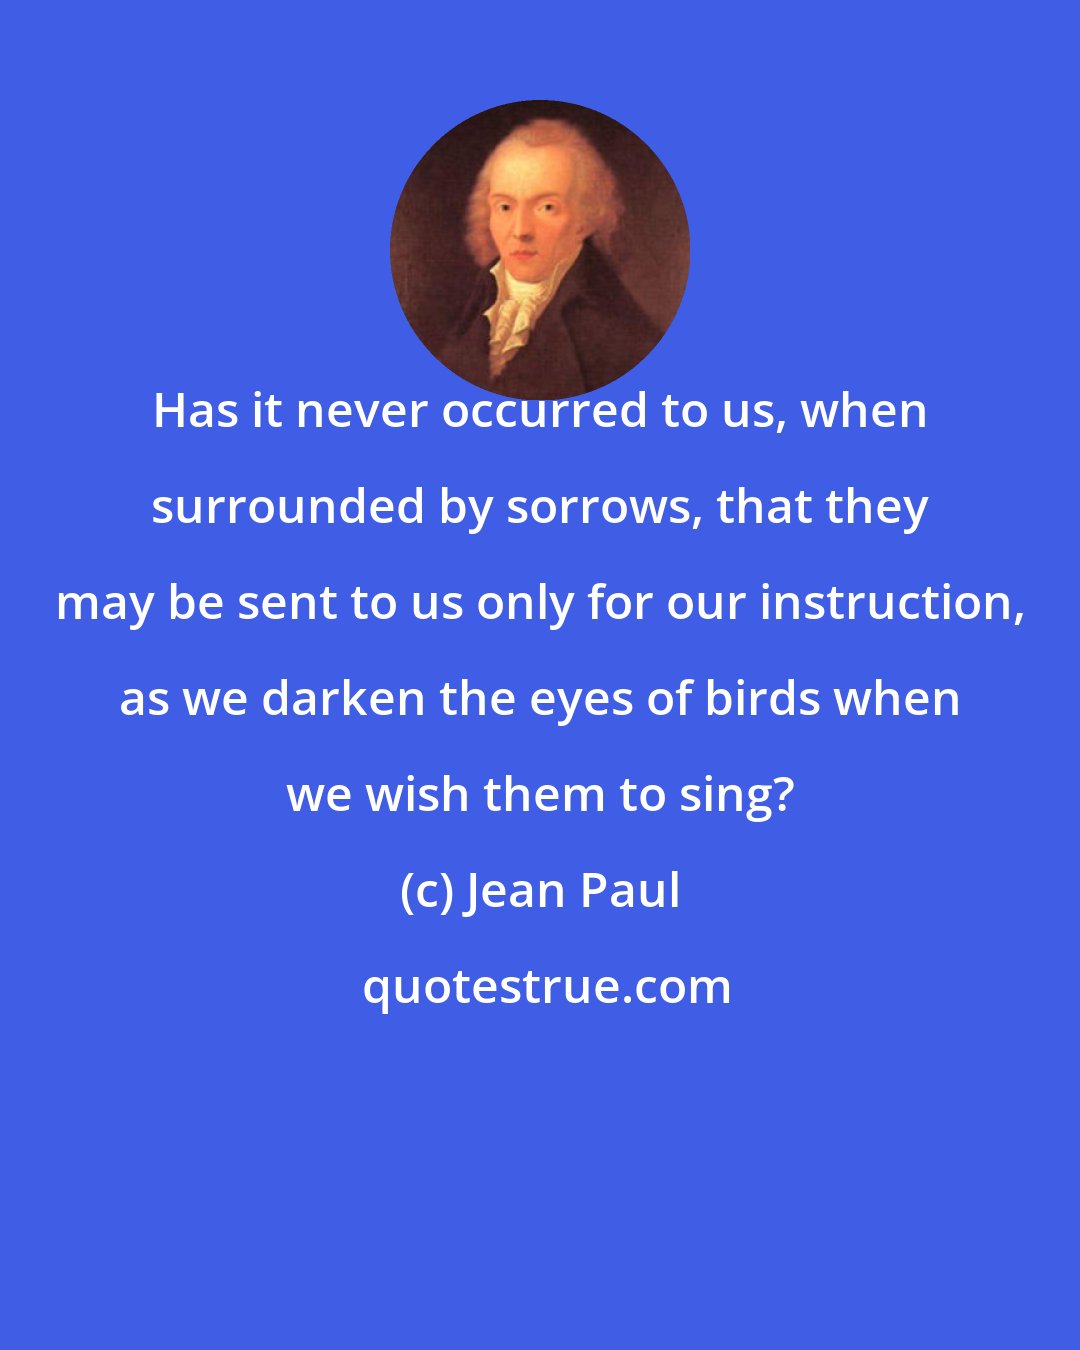 Jean Paul: Has it never occurred to us, when surrounded by sorrows, that they may be sent to us only for our instruction, as we darken the eyes of birds when we wish them to sing?